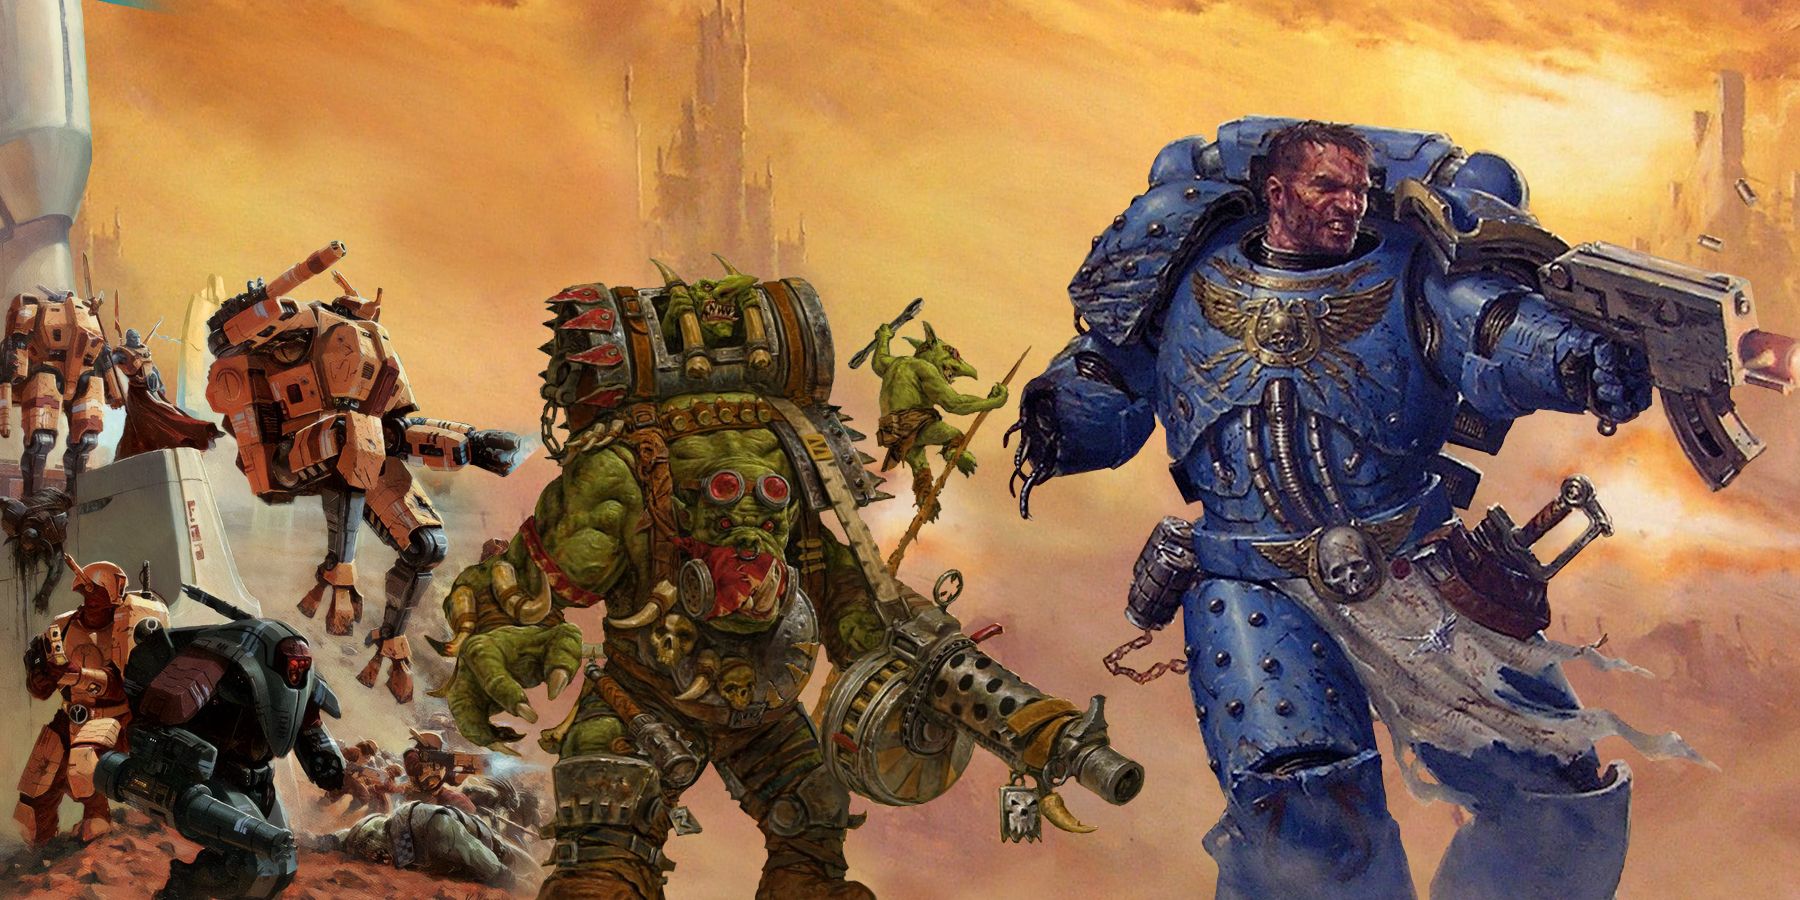 T'au empire, Imperium Of Man, Orks, and chaos Space Marins are amongst The Strongest Warhammer 40K Factions According to Lore